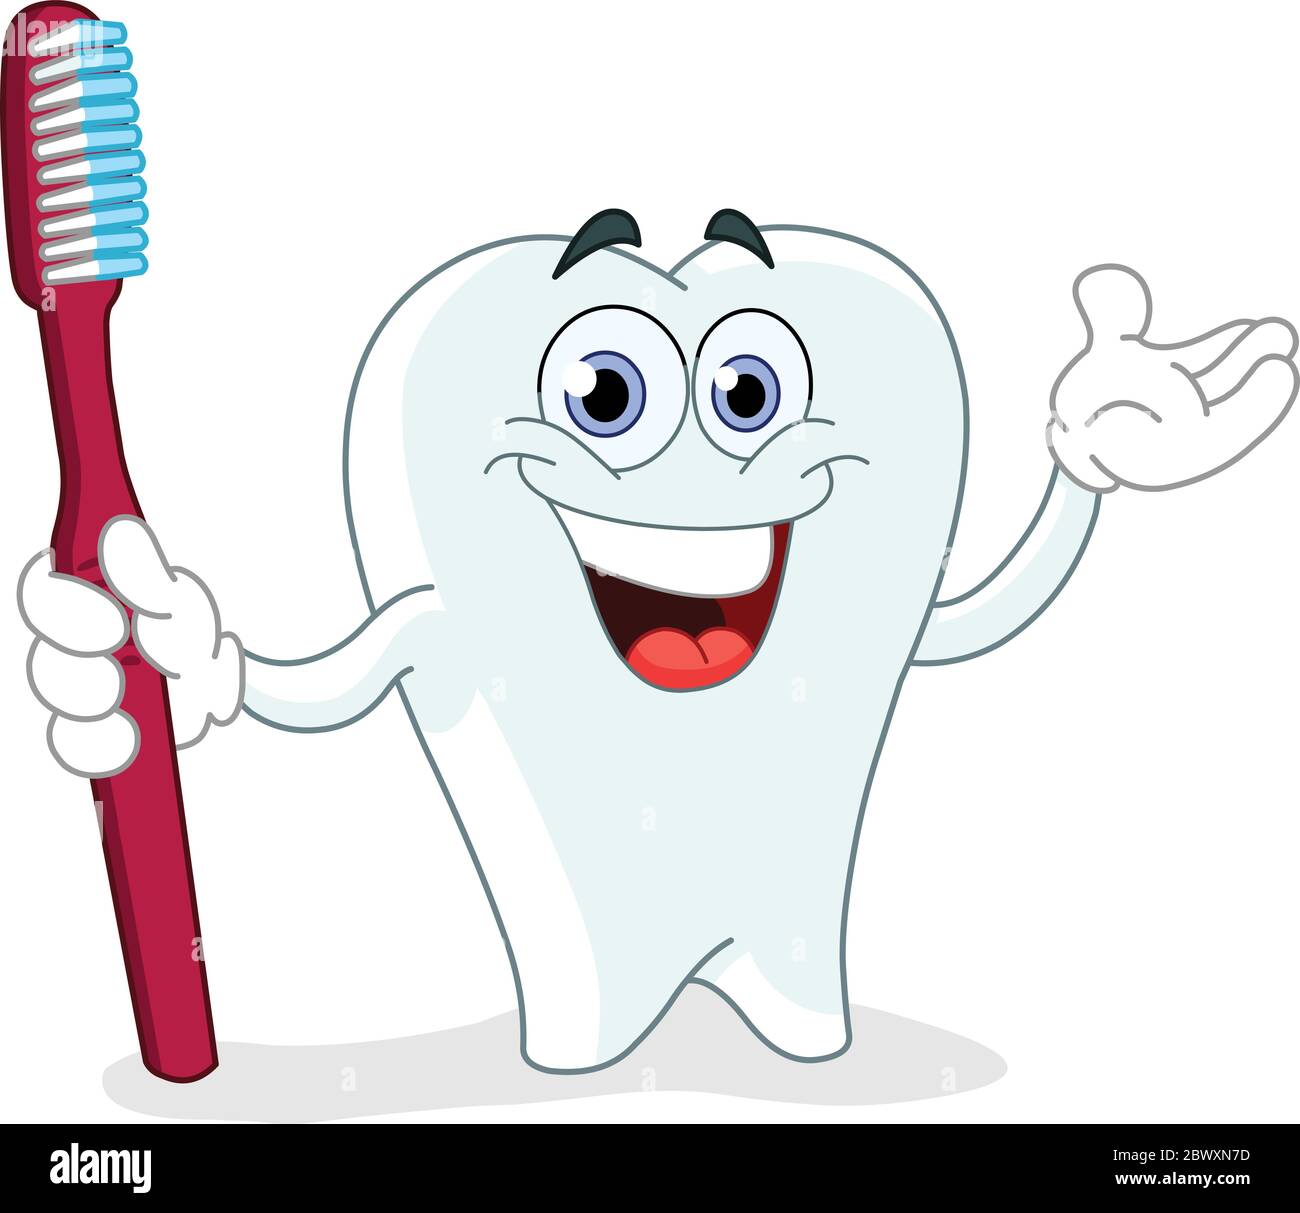 Cartoon tooth holding a toothbrush Stock Vector